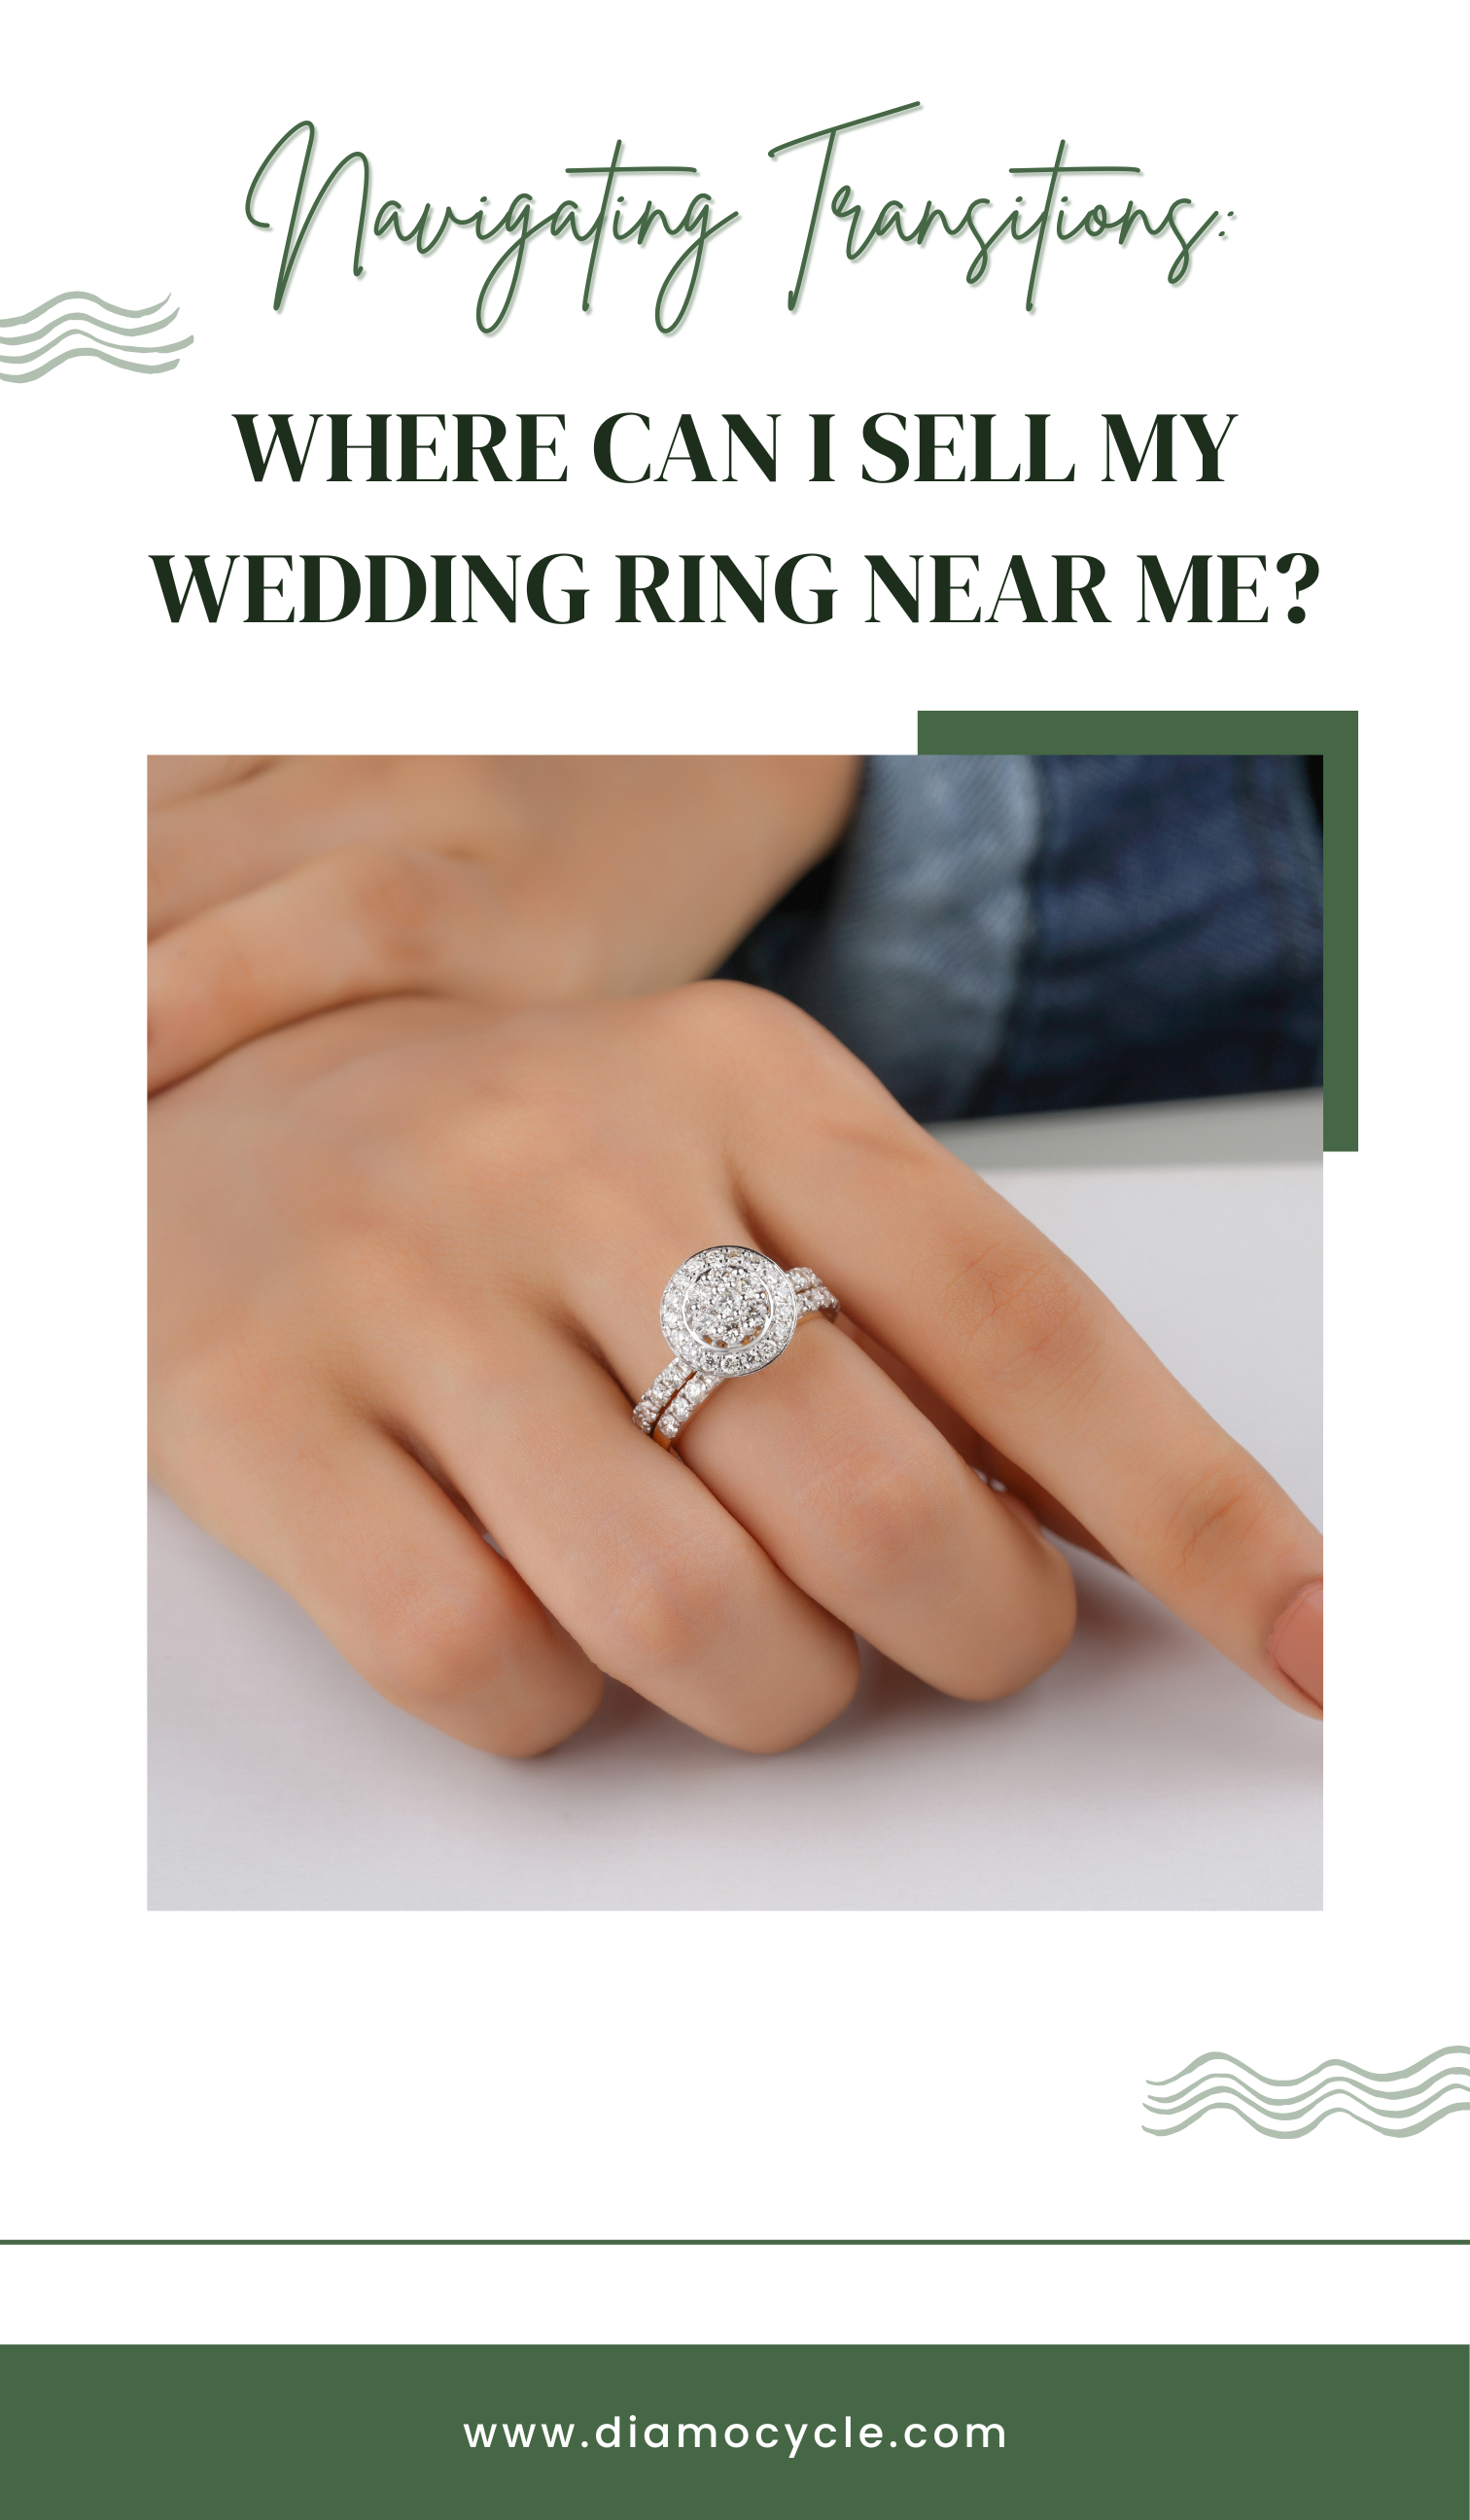 Navigating Transitions: Where Can I Sell My Wedding Ring Near Me?